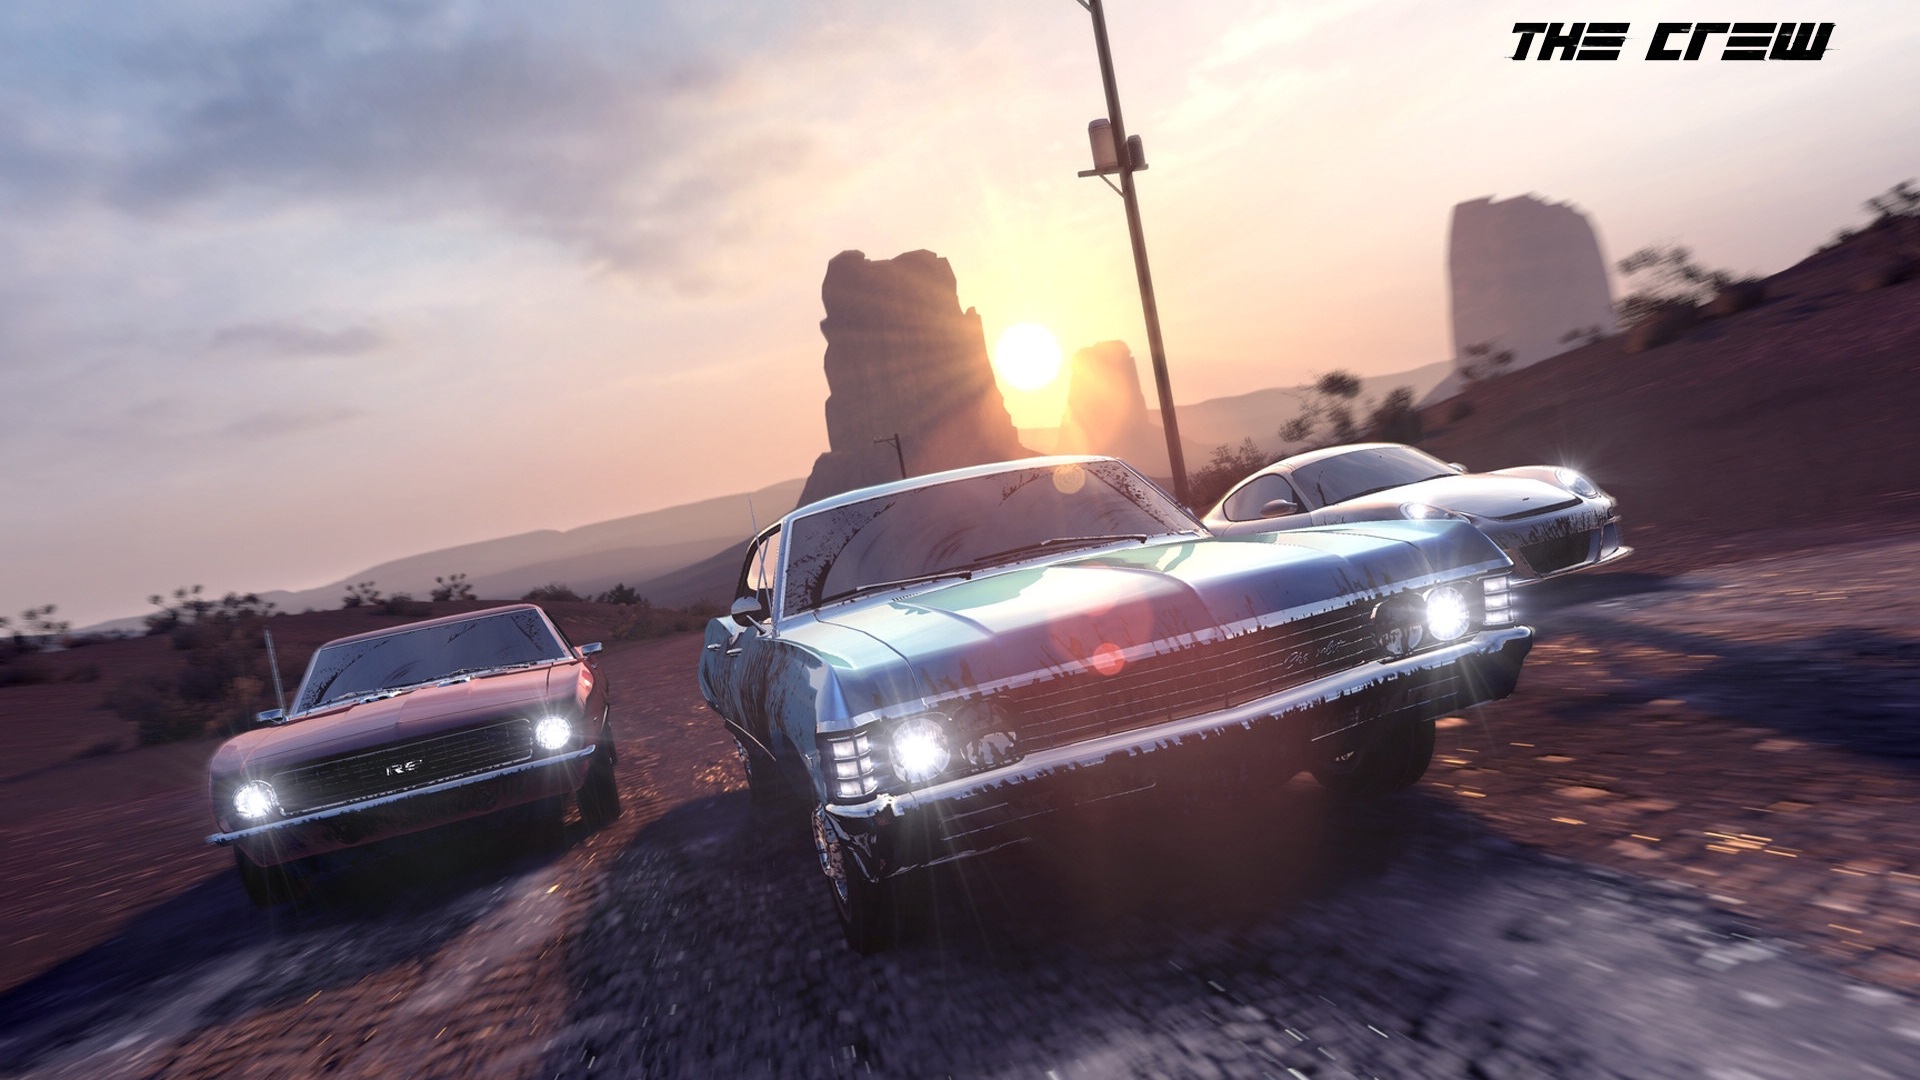 The Crew game HD wallpapers #4 - 1920x1080